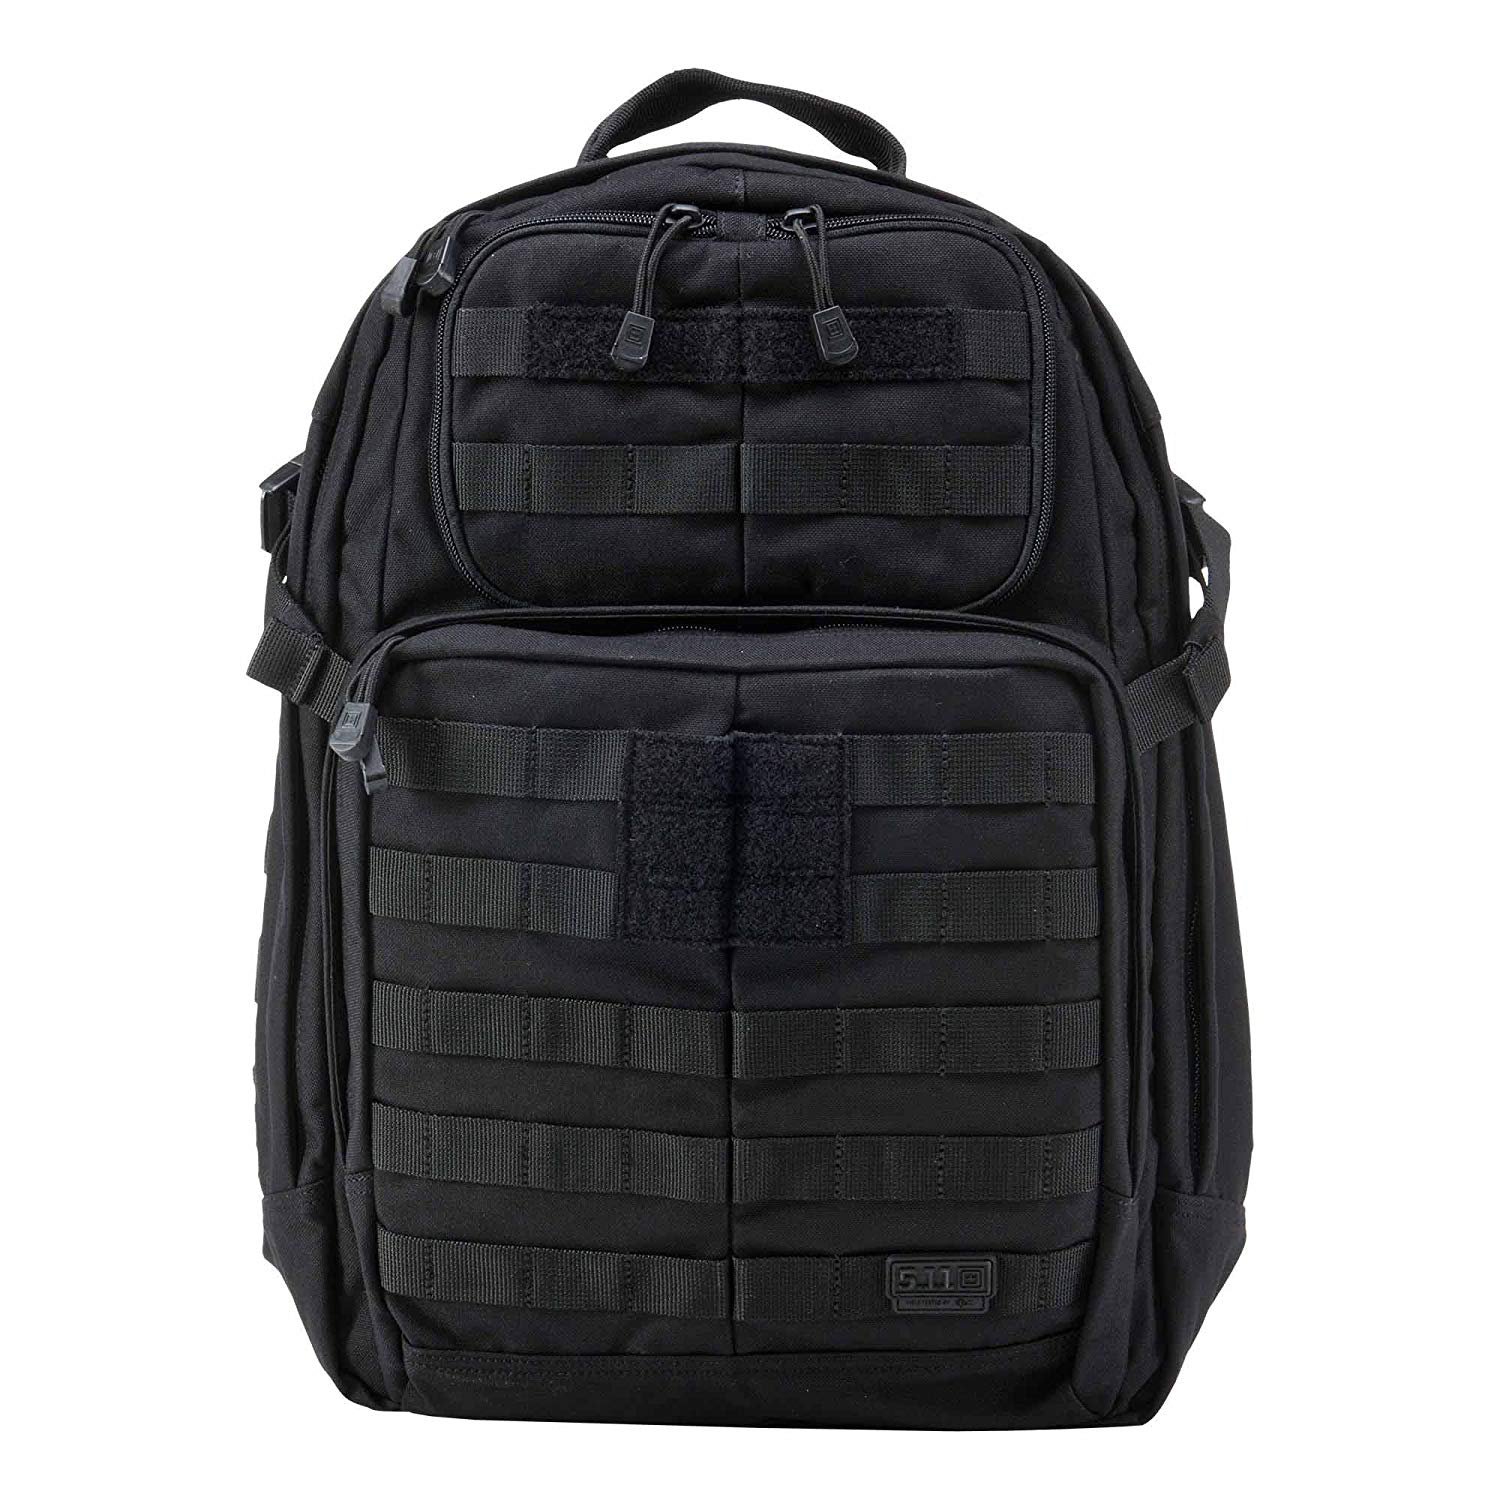 5.11 Rush 24 Military Tactical Backpack, Black - image 1 of 8